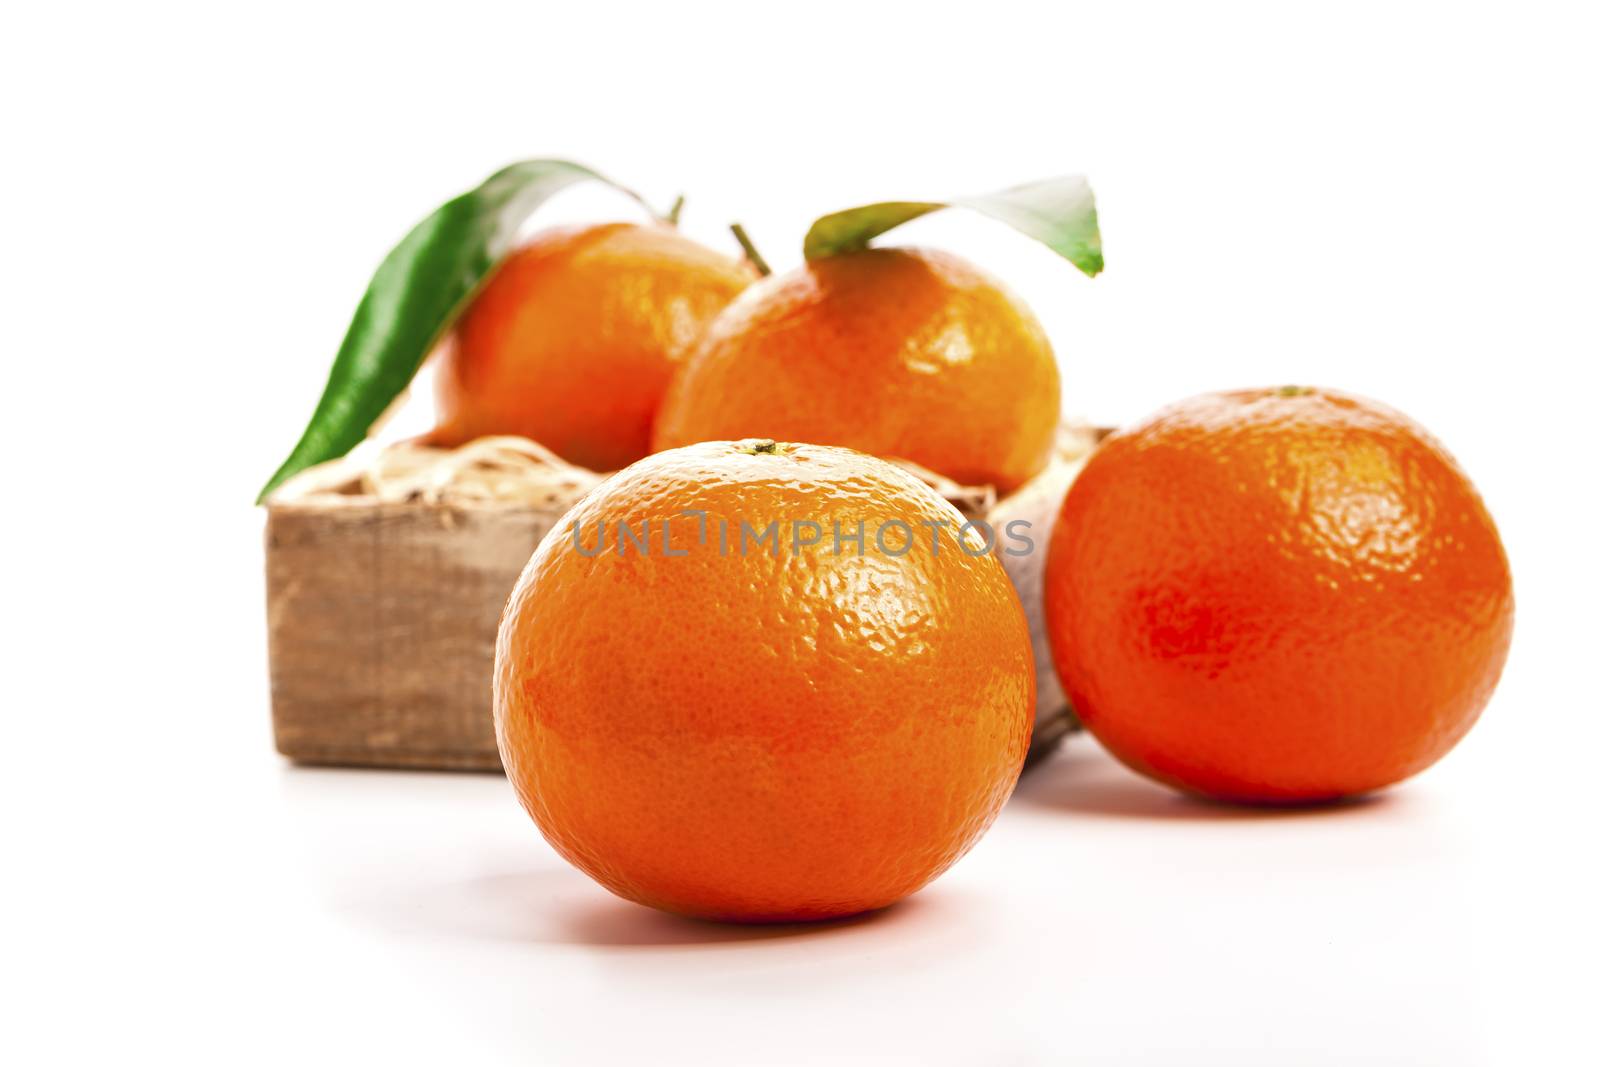 Ripe mandarines, Tangerines  with leaves on a white background. Tangerines